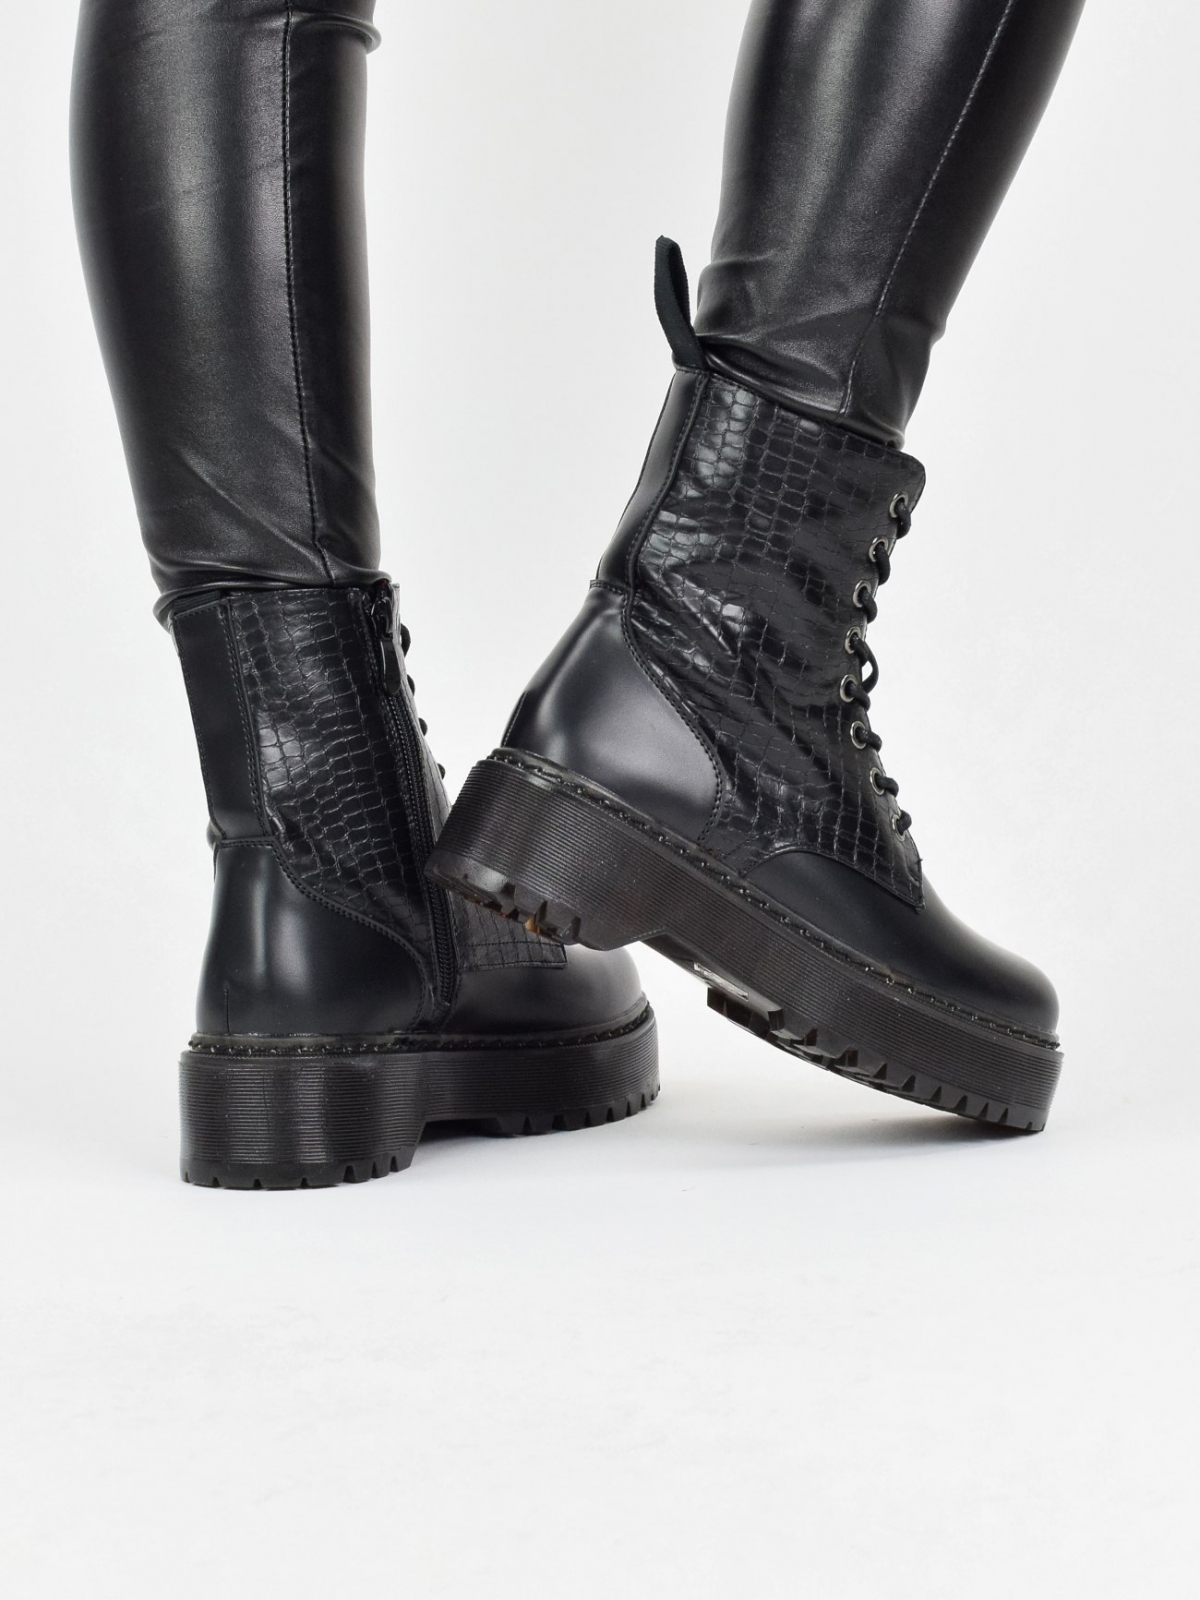 Ankle boots for women with different leather textures in black